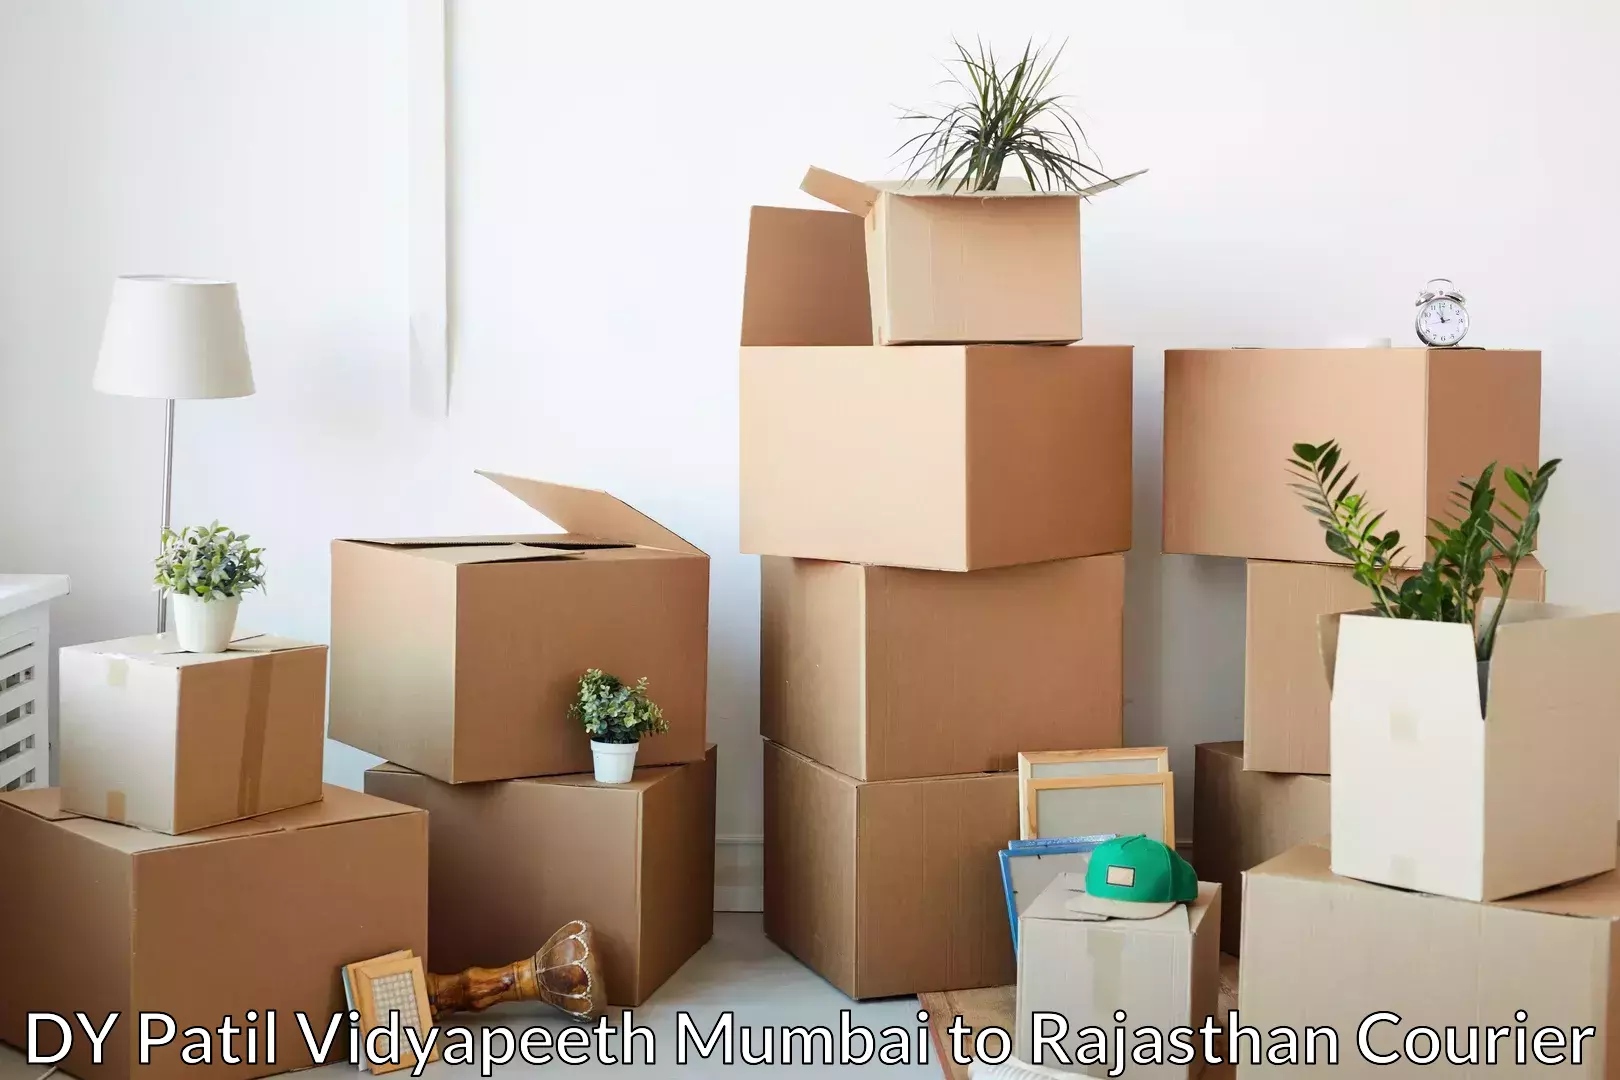 Furniture moving services in DY Patil Vidyapeeth Mumbai to Mathania